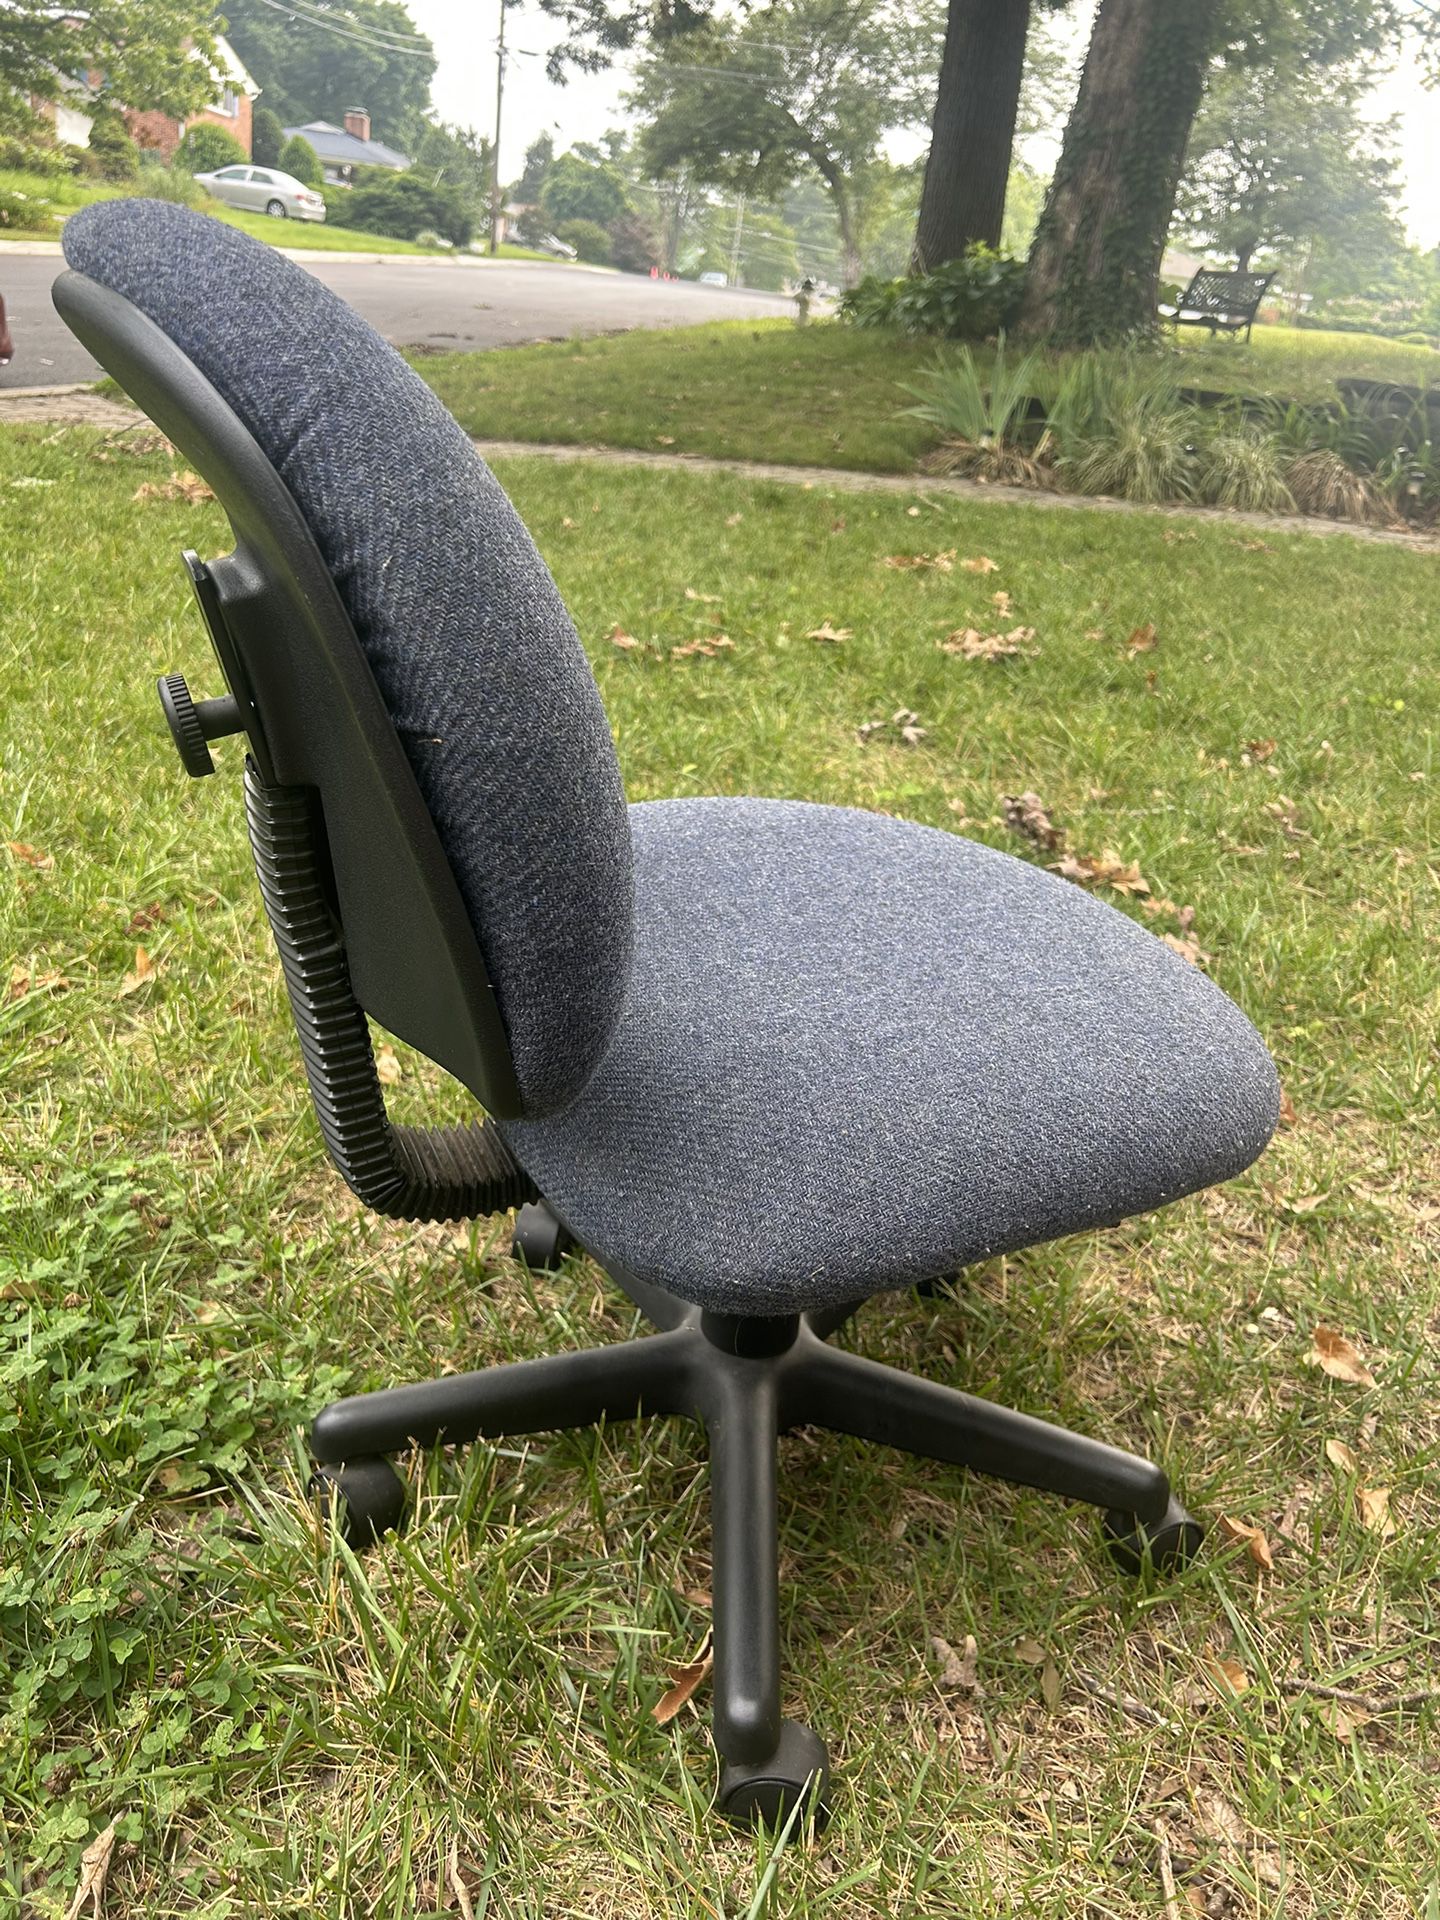 Office Chair, Adjustable Height